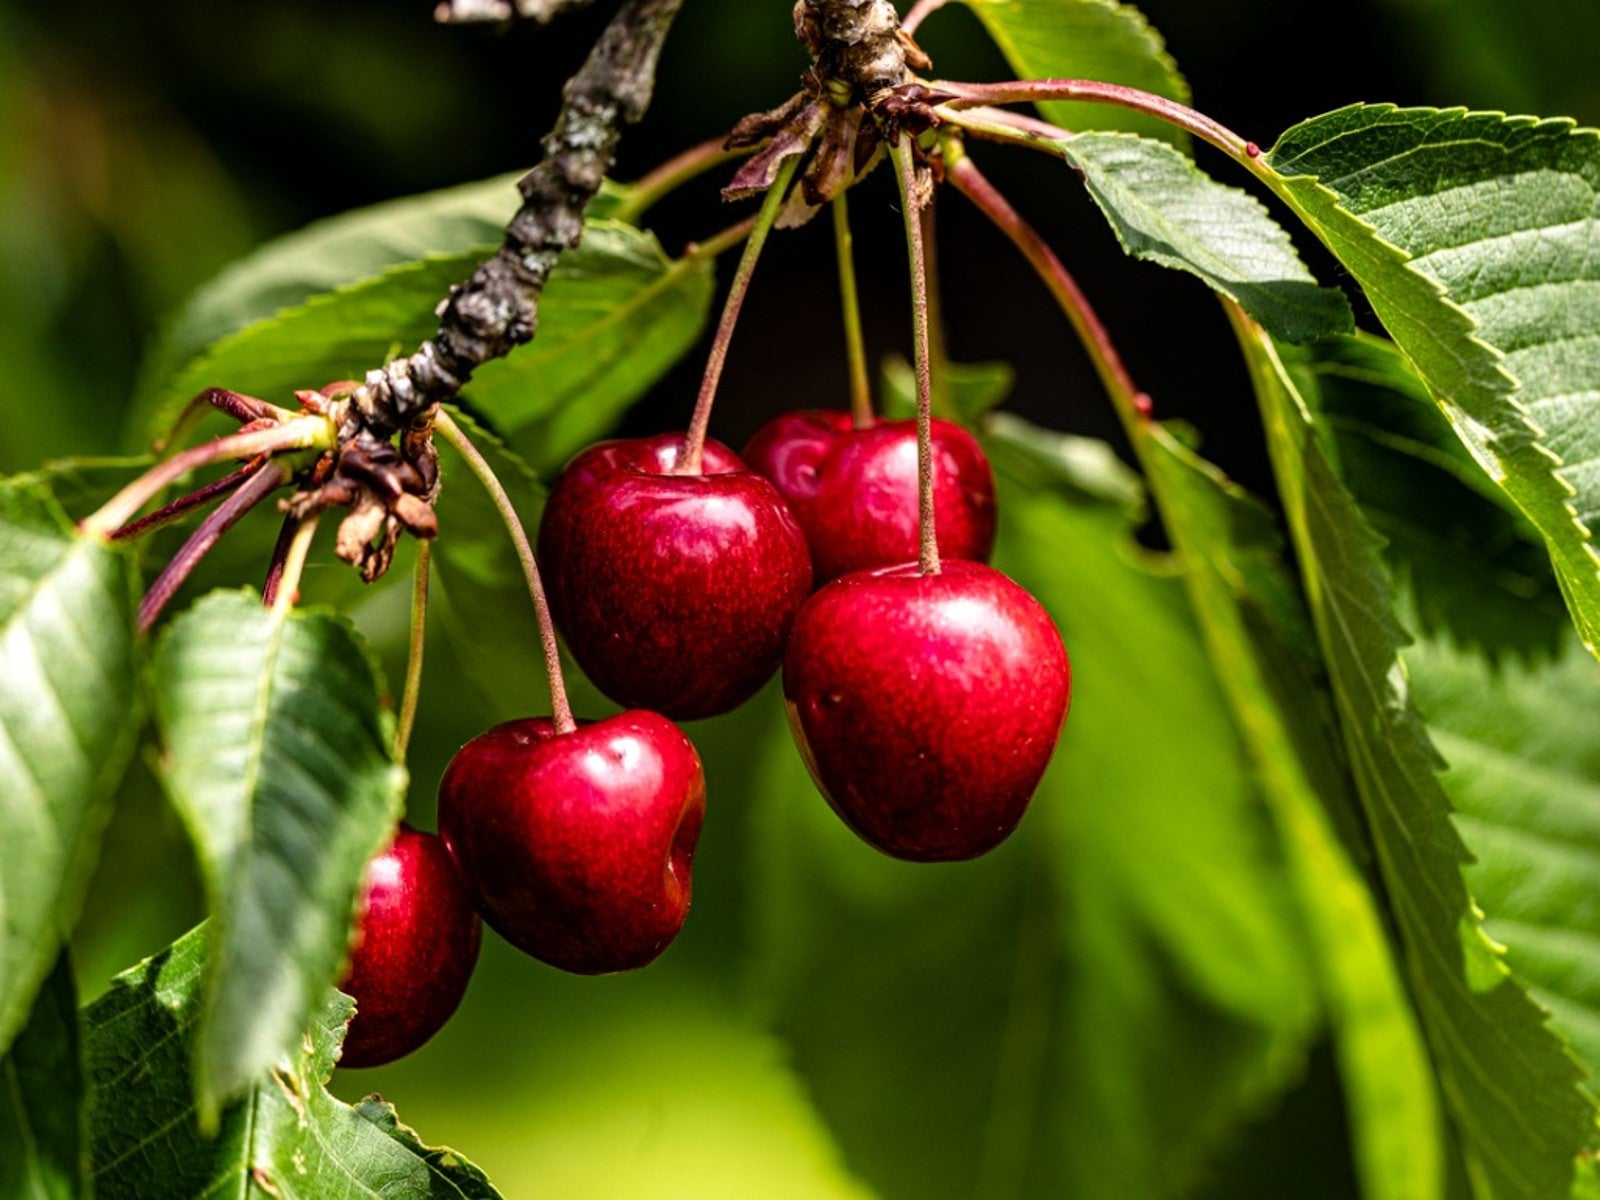 Growing Cherry Trees: Planting Cherry Trees In Your Garden